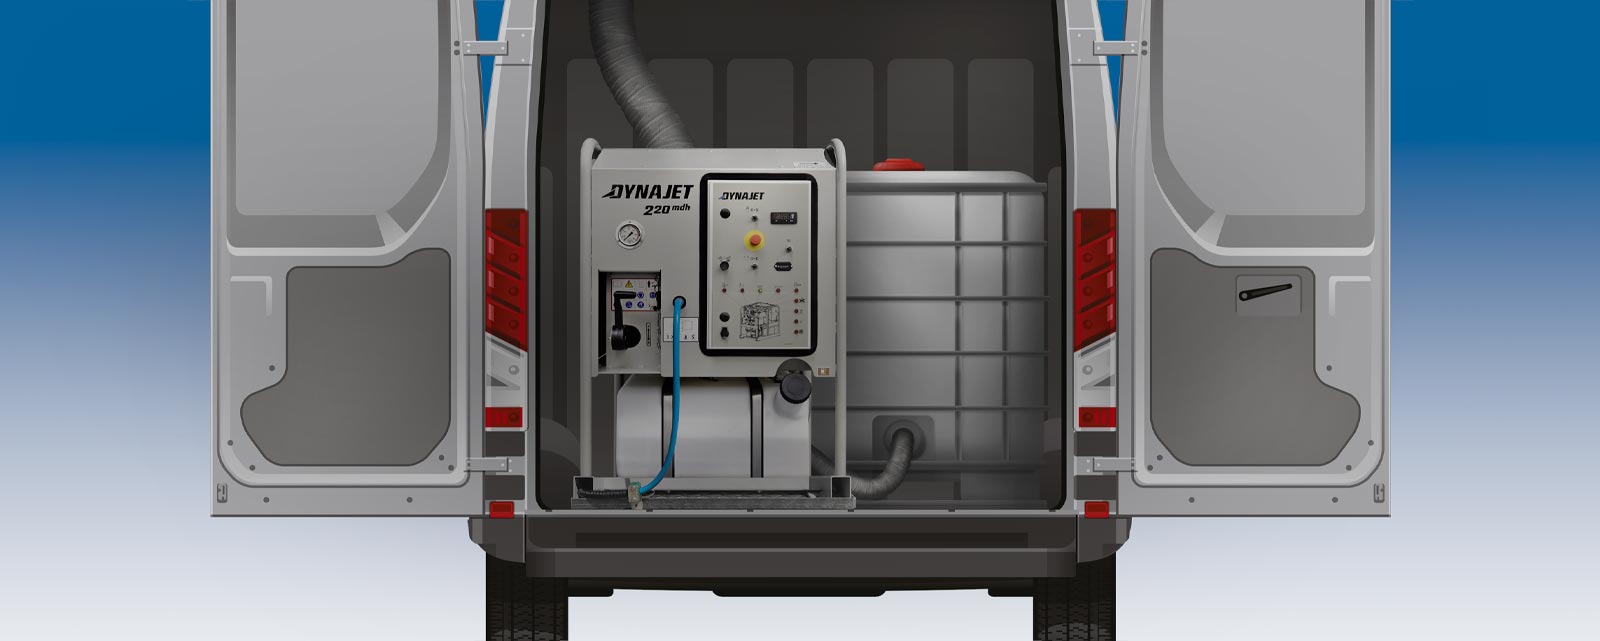 The DYNAJET skids and built-in modules with a working pressure of 220 to 1,000 bar and optional additional hot water generators are small and compact